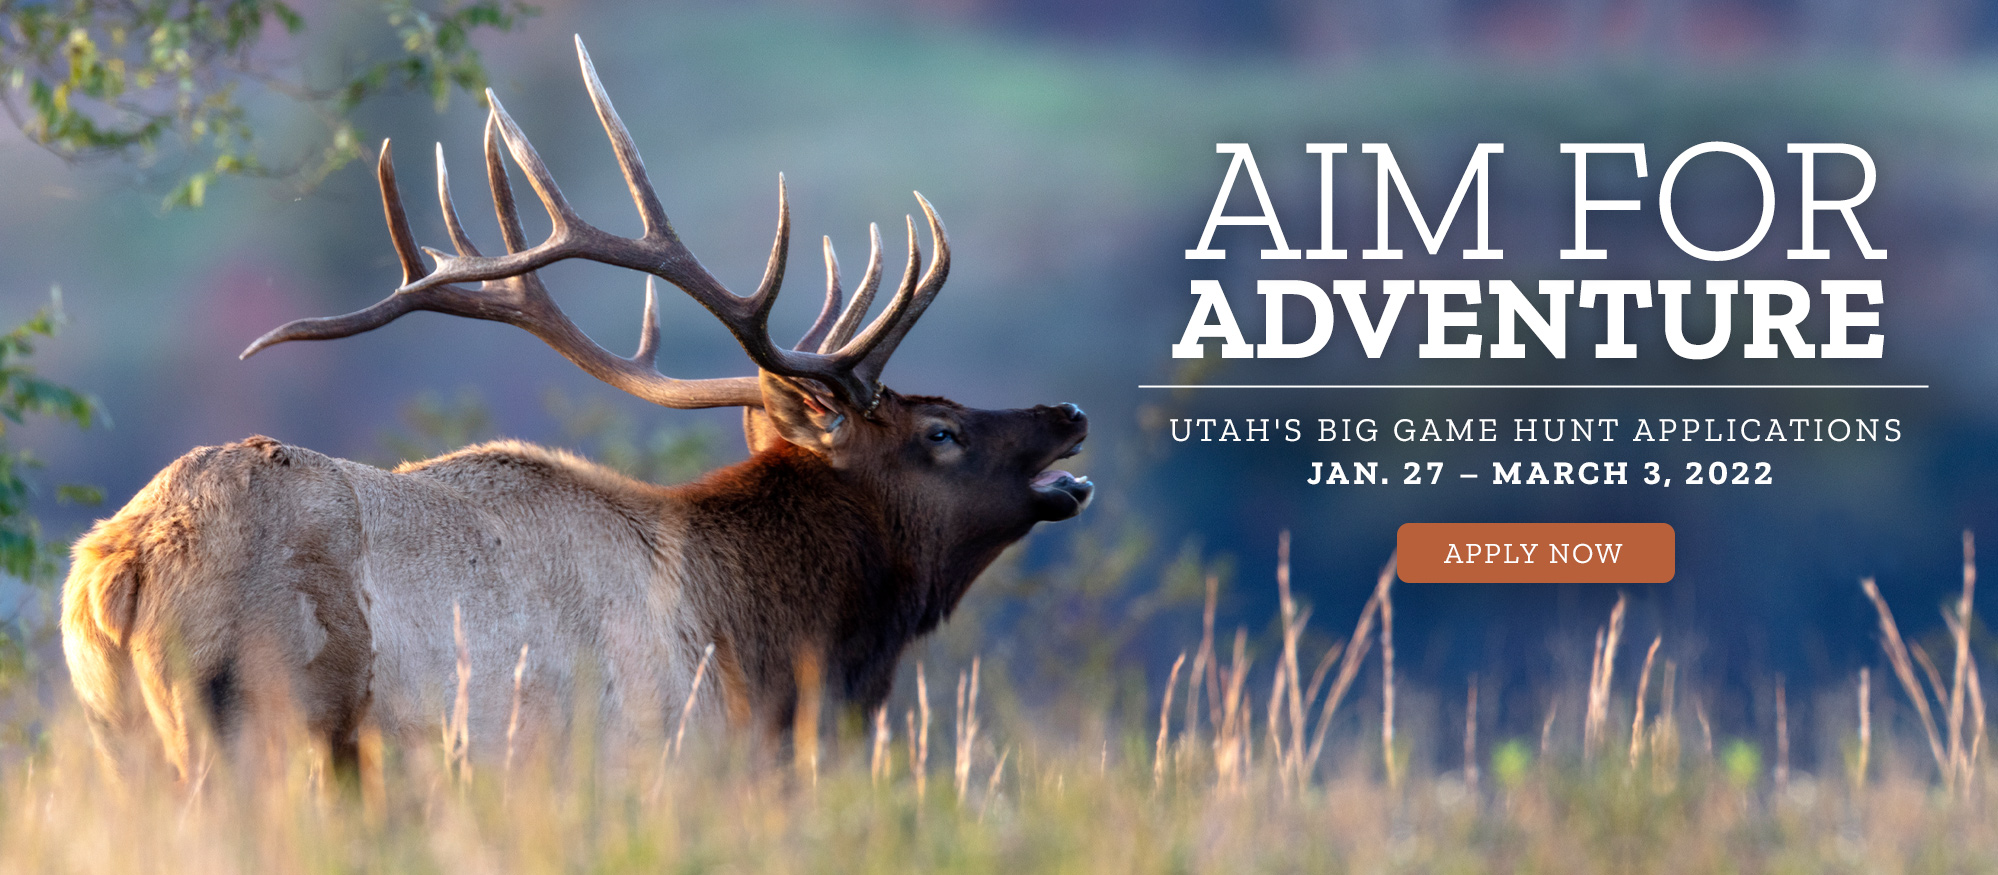 Aim for adventure! Utah&apos;s big game hunt applications run from Jan. 27 to March 3, 2022. Apply now!